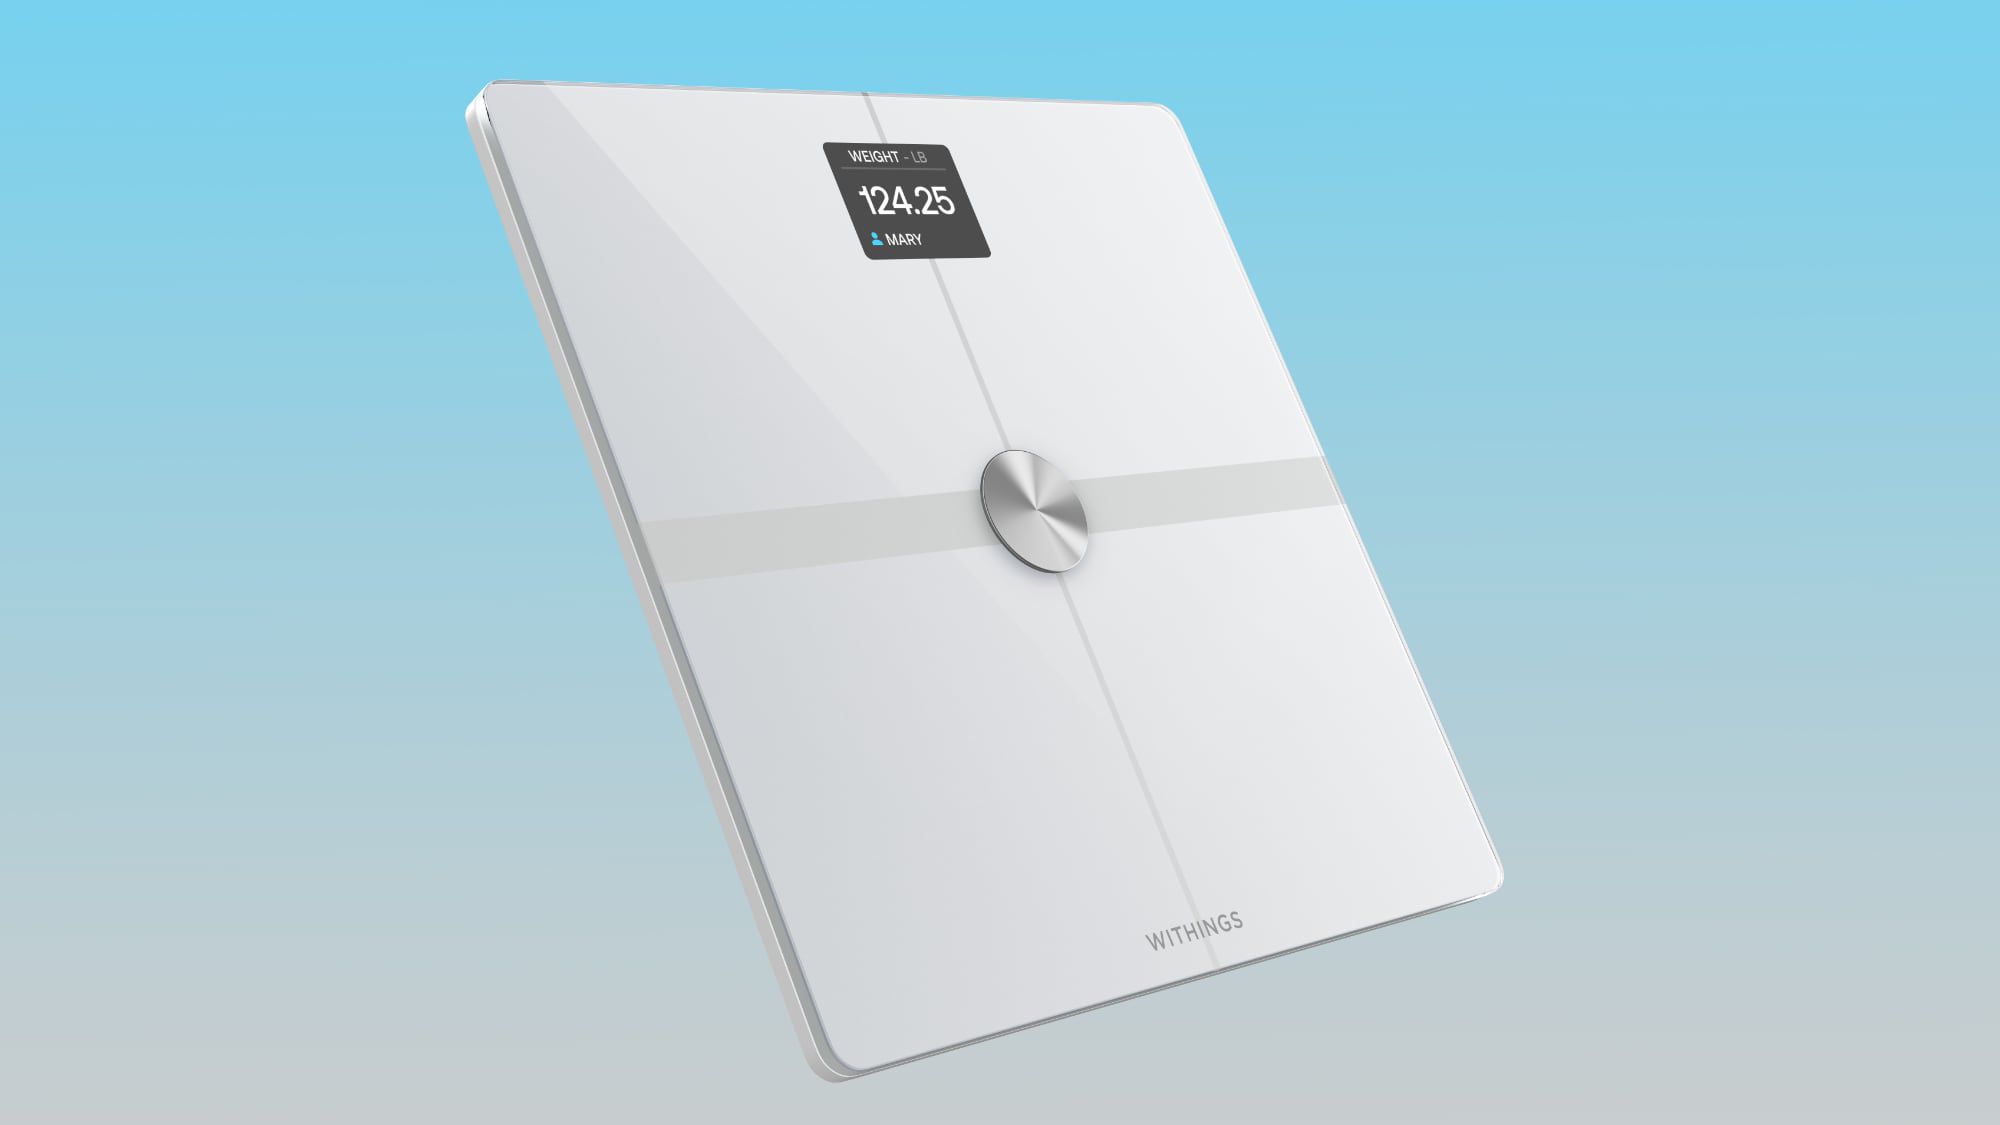 Withings' luxury weighing scale is amazing, if inessential